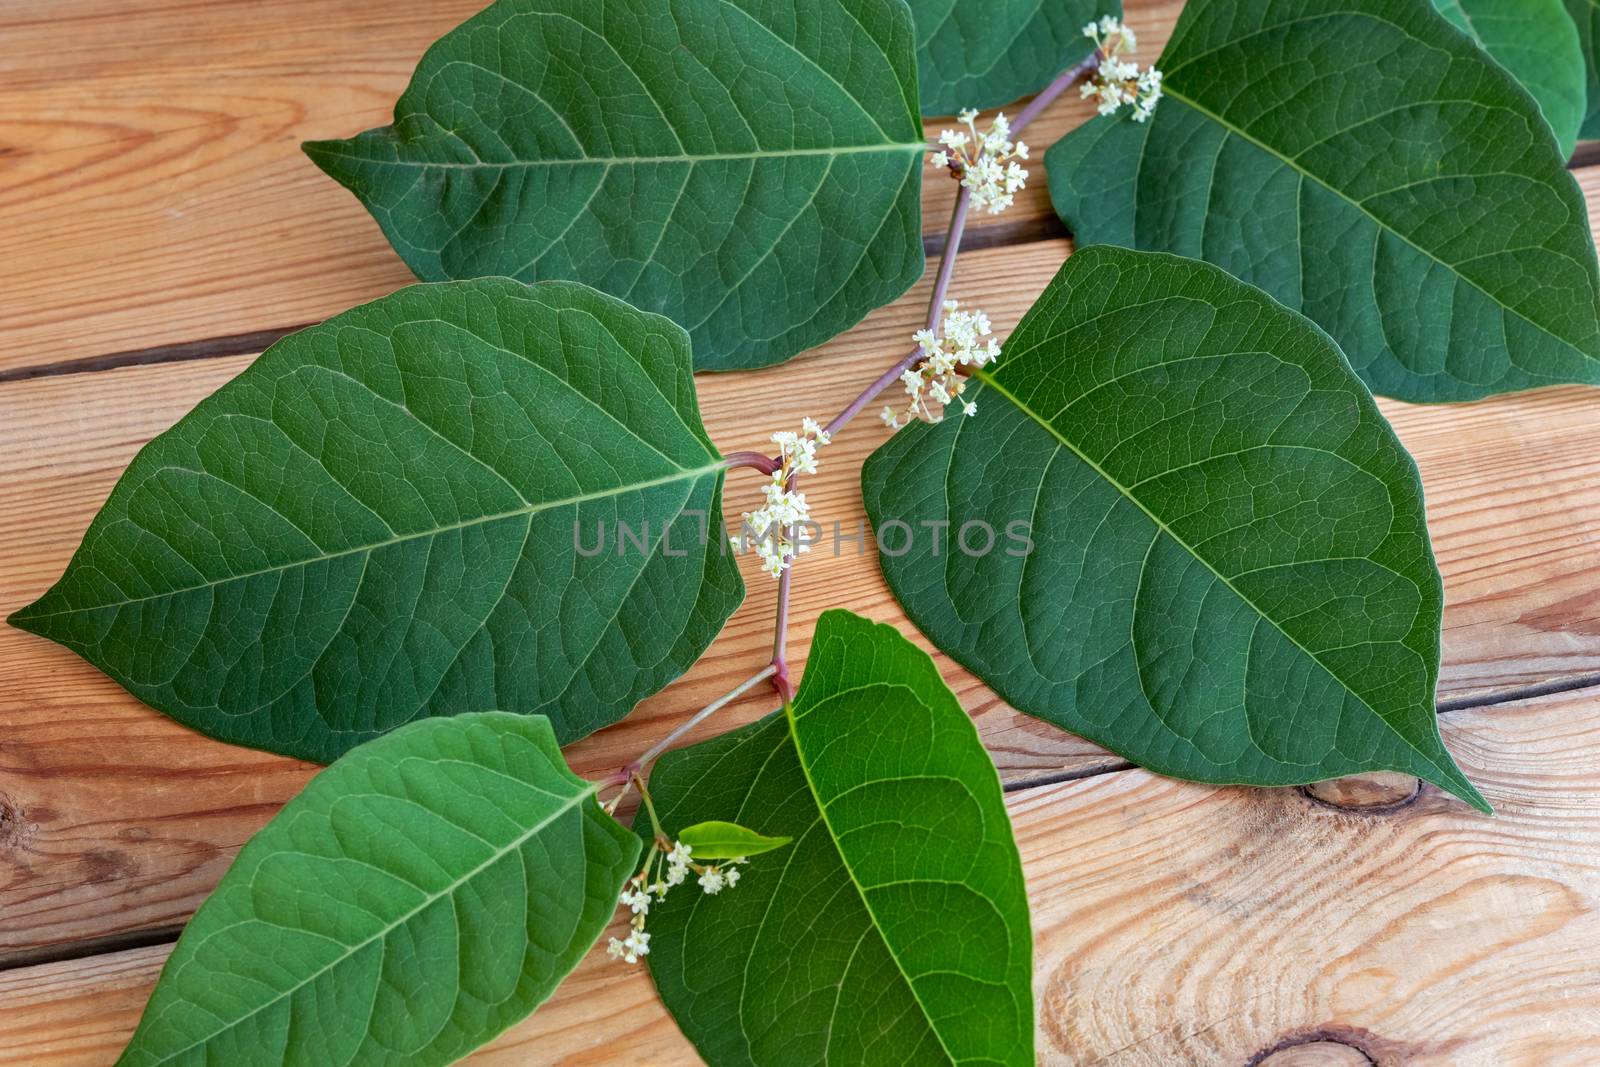 Blooming Japanese knotweed branch on a table by madeleine_steinbach